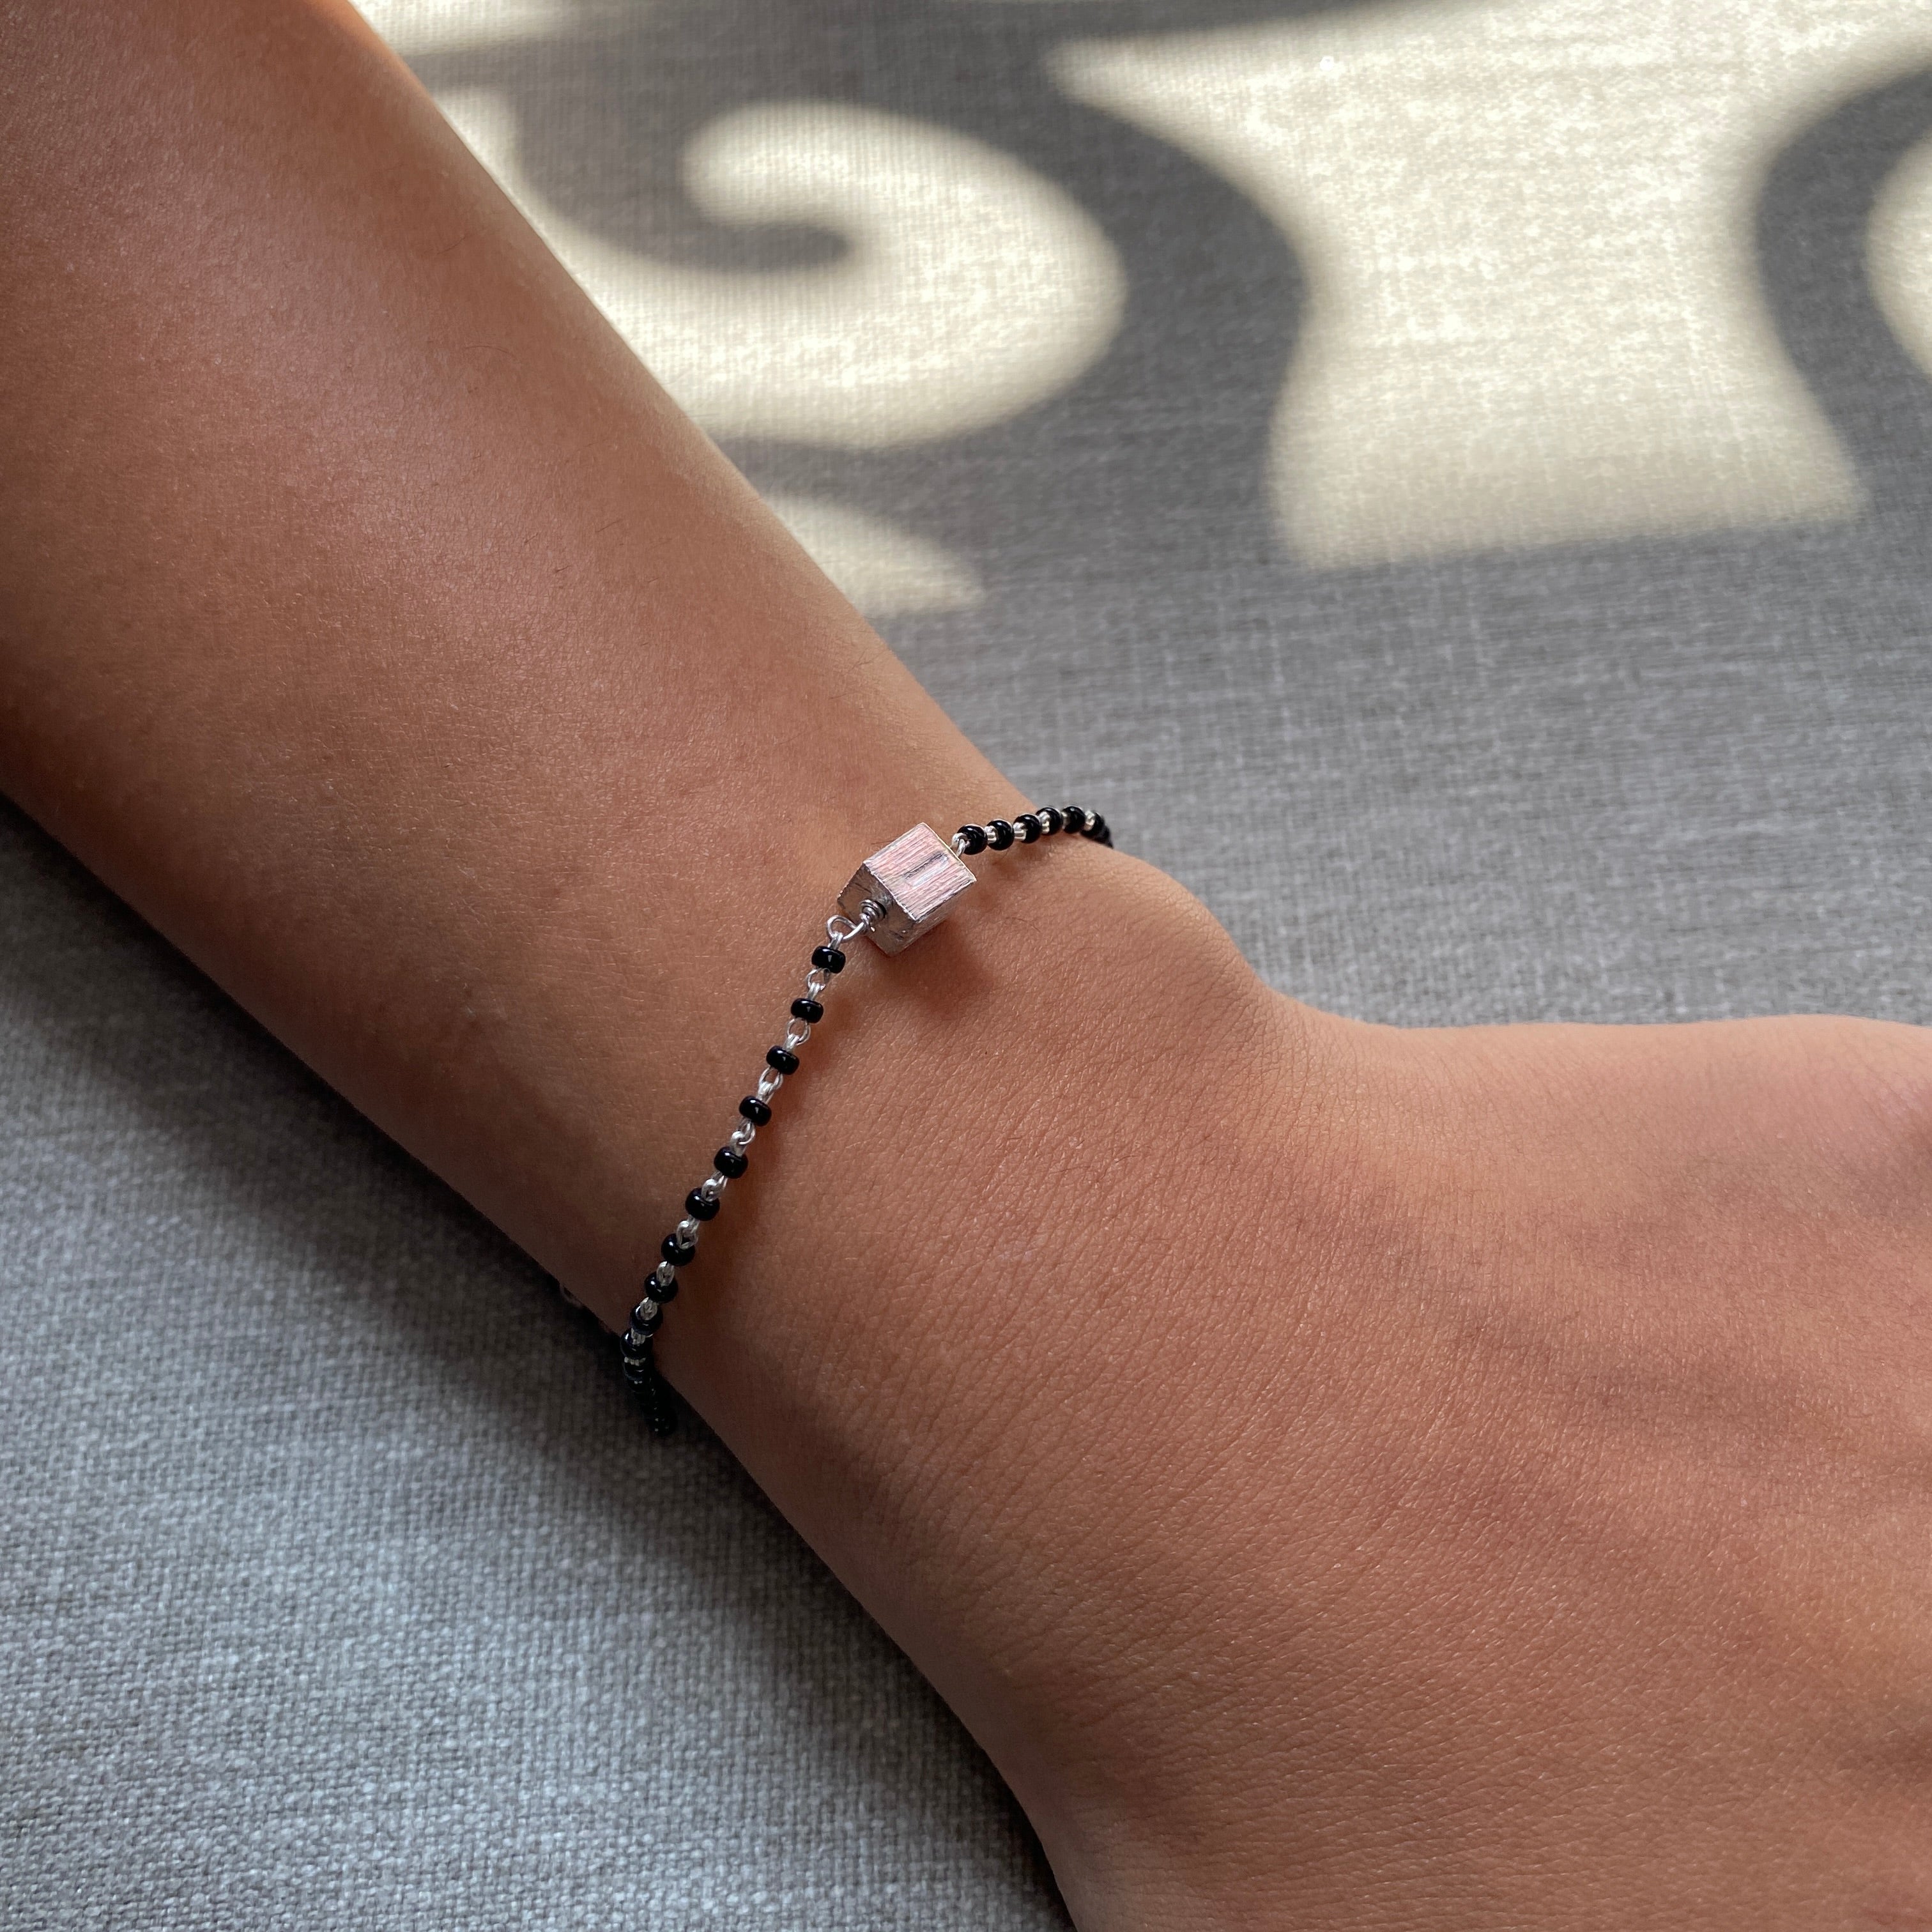 a person wearing a bracelet with a cross on it